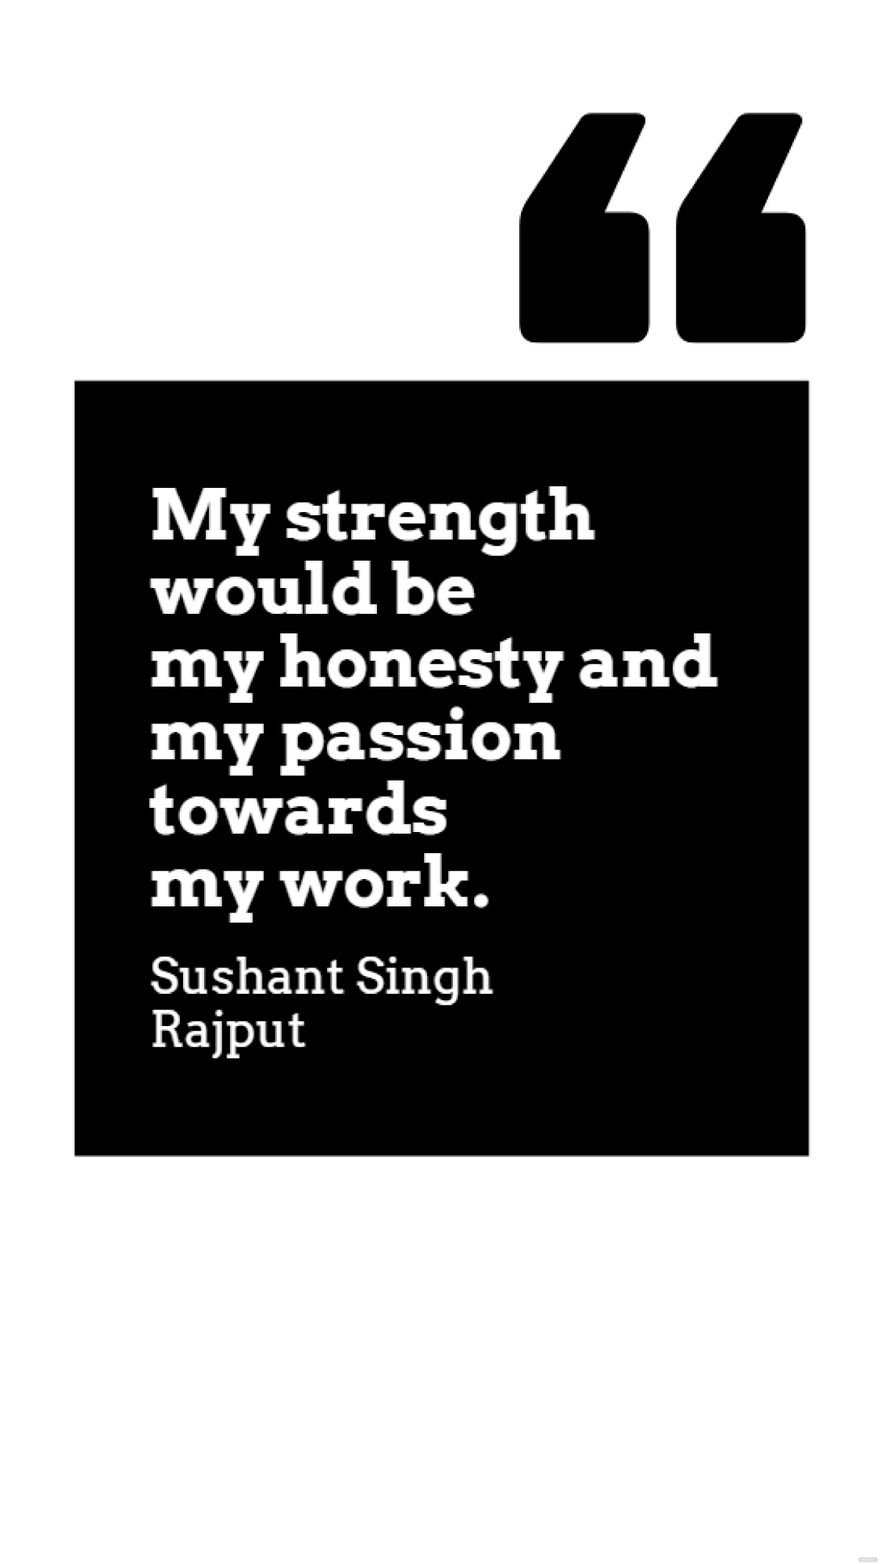 Sushant Singh Rajput - My strength would be my honesty and my passion towards my work. in JPG